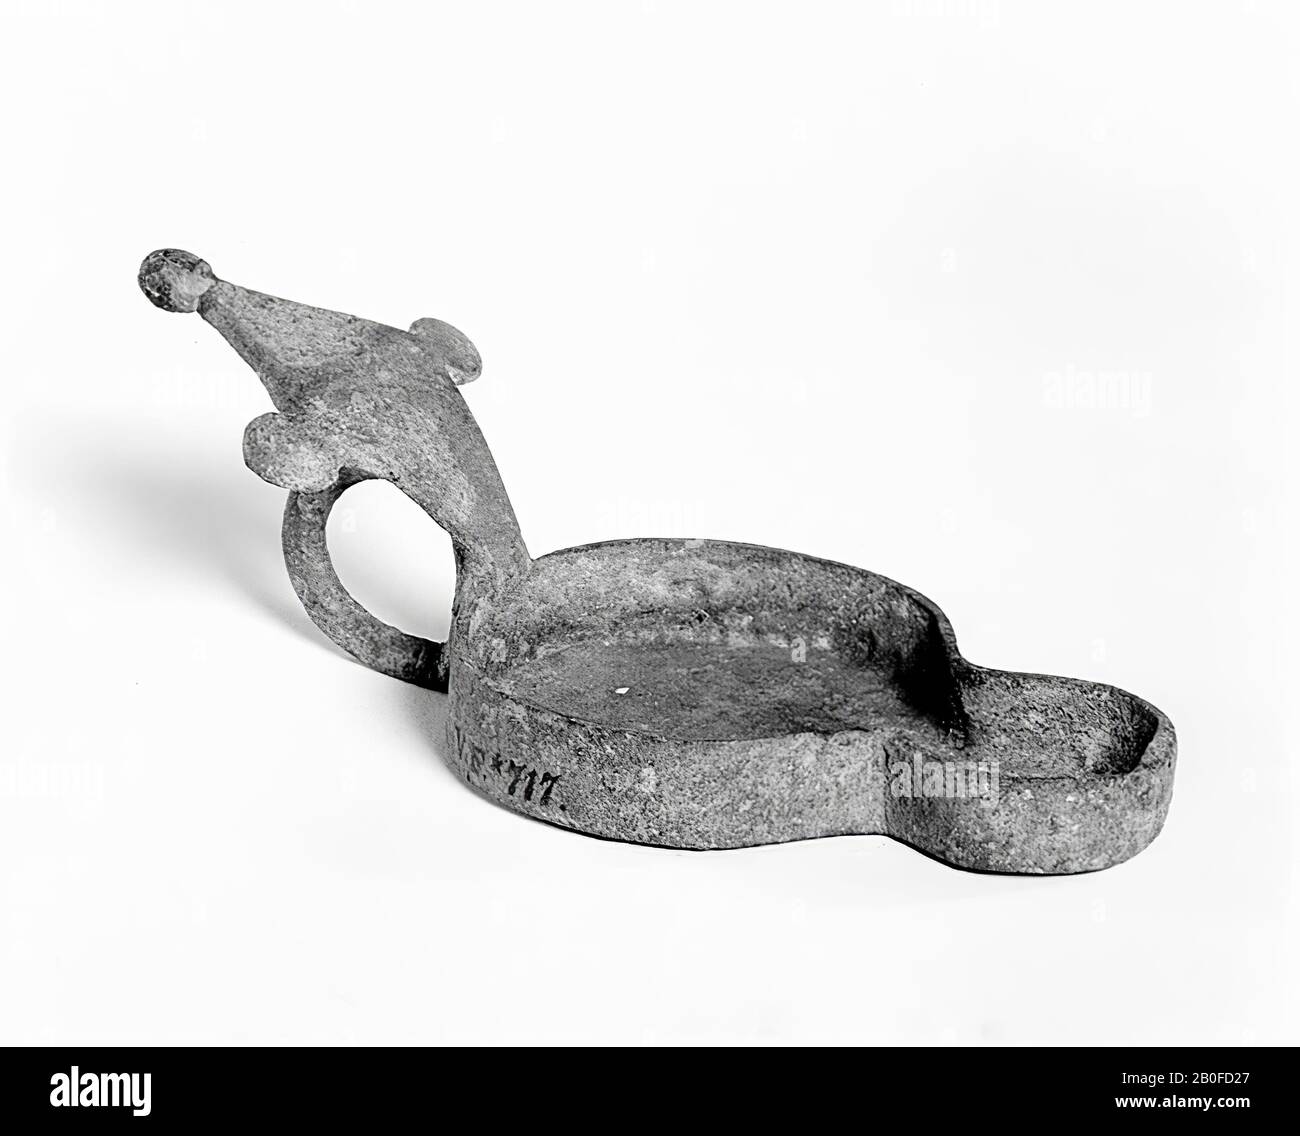 Bronze handle of a box or the like. The eye bolts, in which it moved, are both still present., Handle, metal, bronze, 5 x 13.5 cm, roman 15-250, the Netherlands, Utrecht, Bunnik, Vechten, Houtense Vlakte Stock Photo